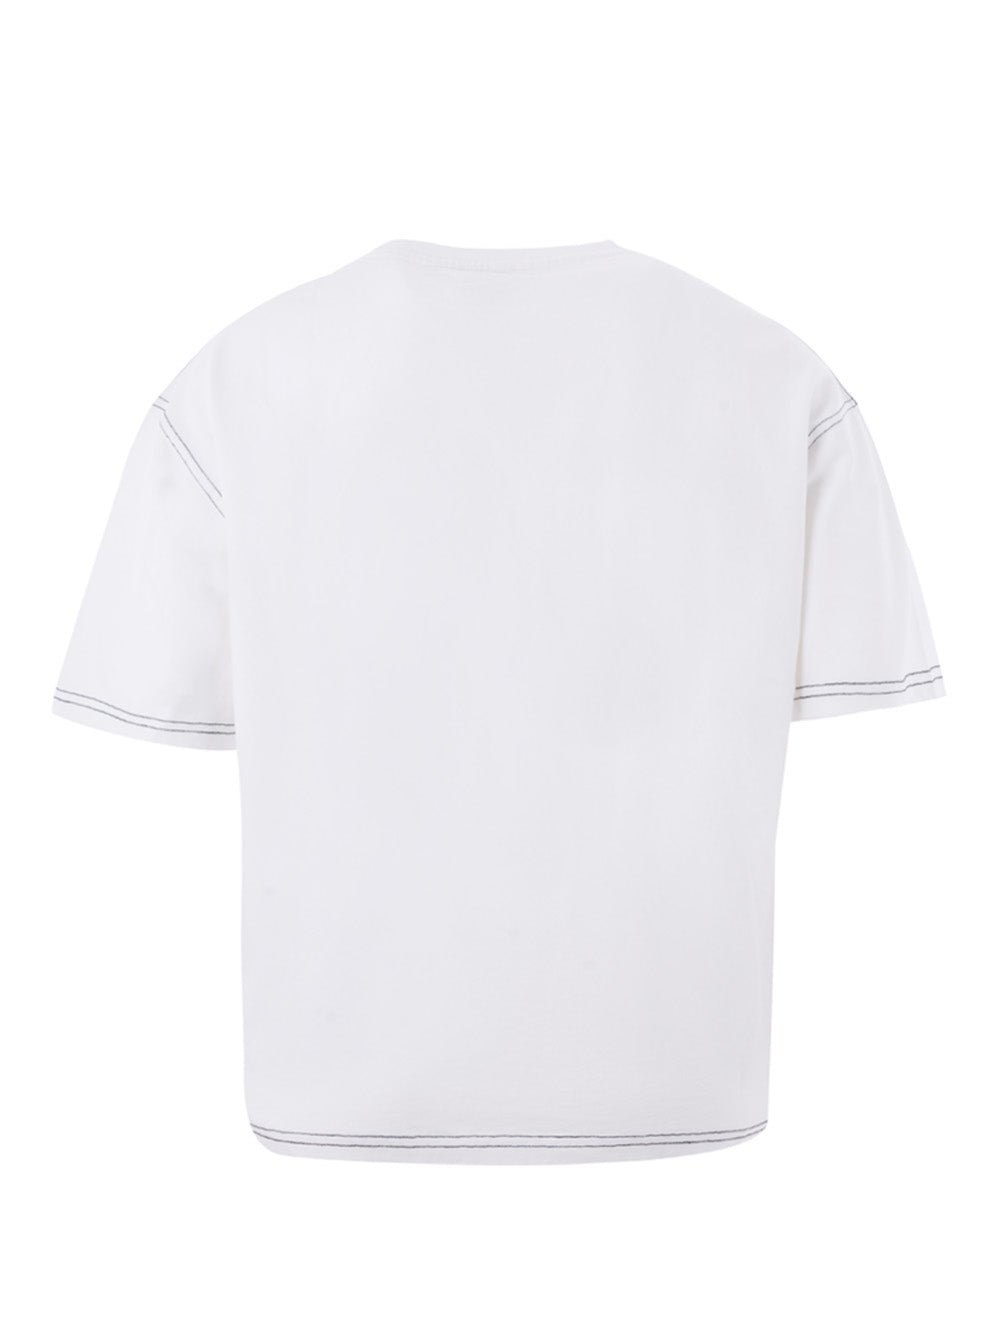 Kenzo White Cotton T-Shirt with Front Print